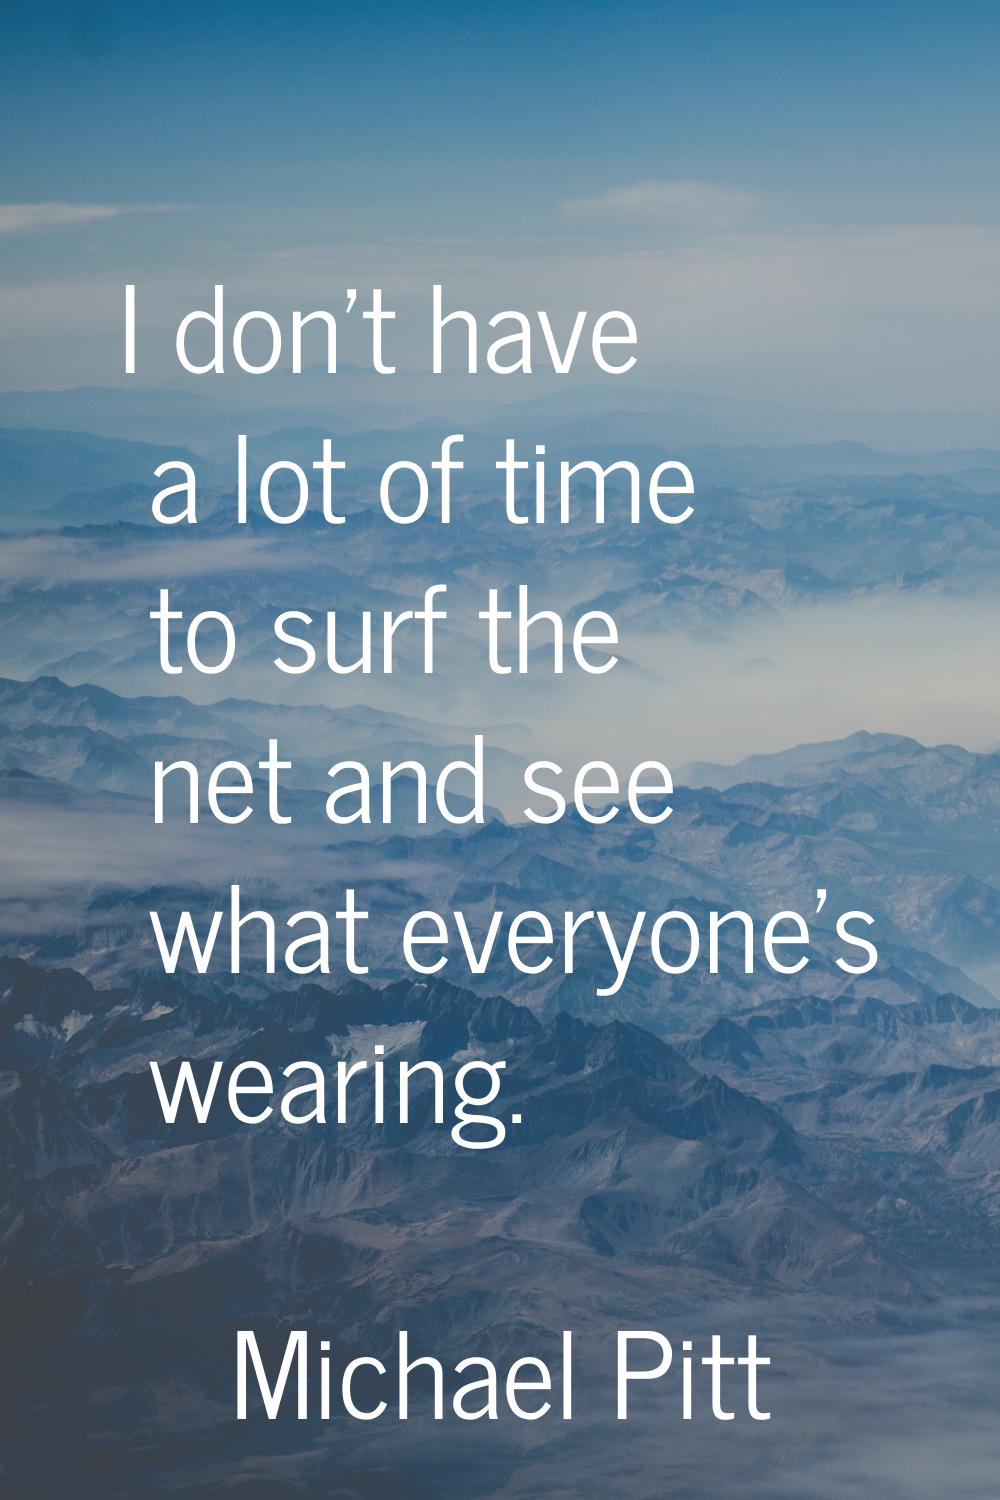 I don't have a lot of time to surf the net and see what everyone's wearing.